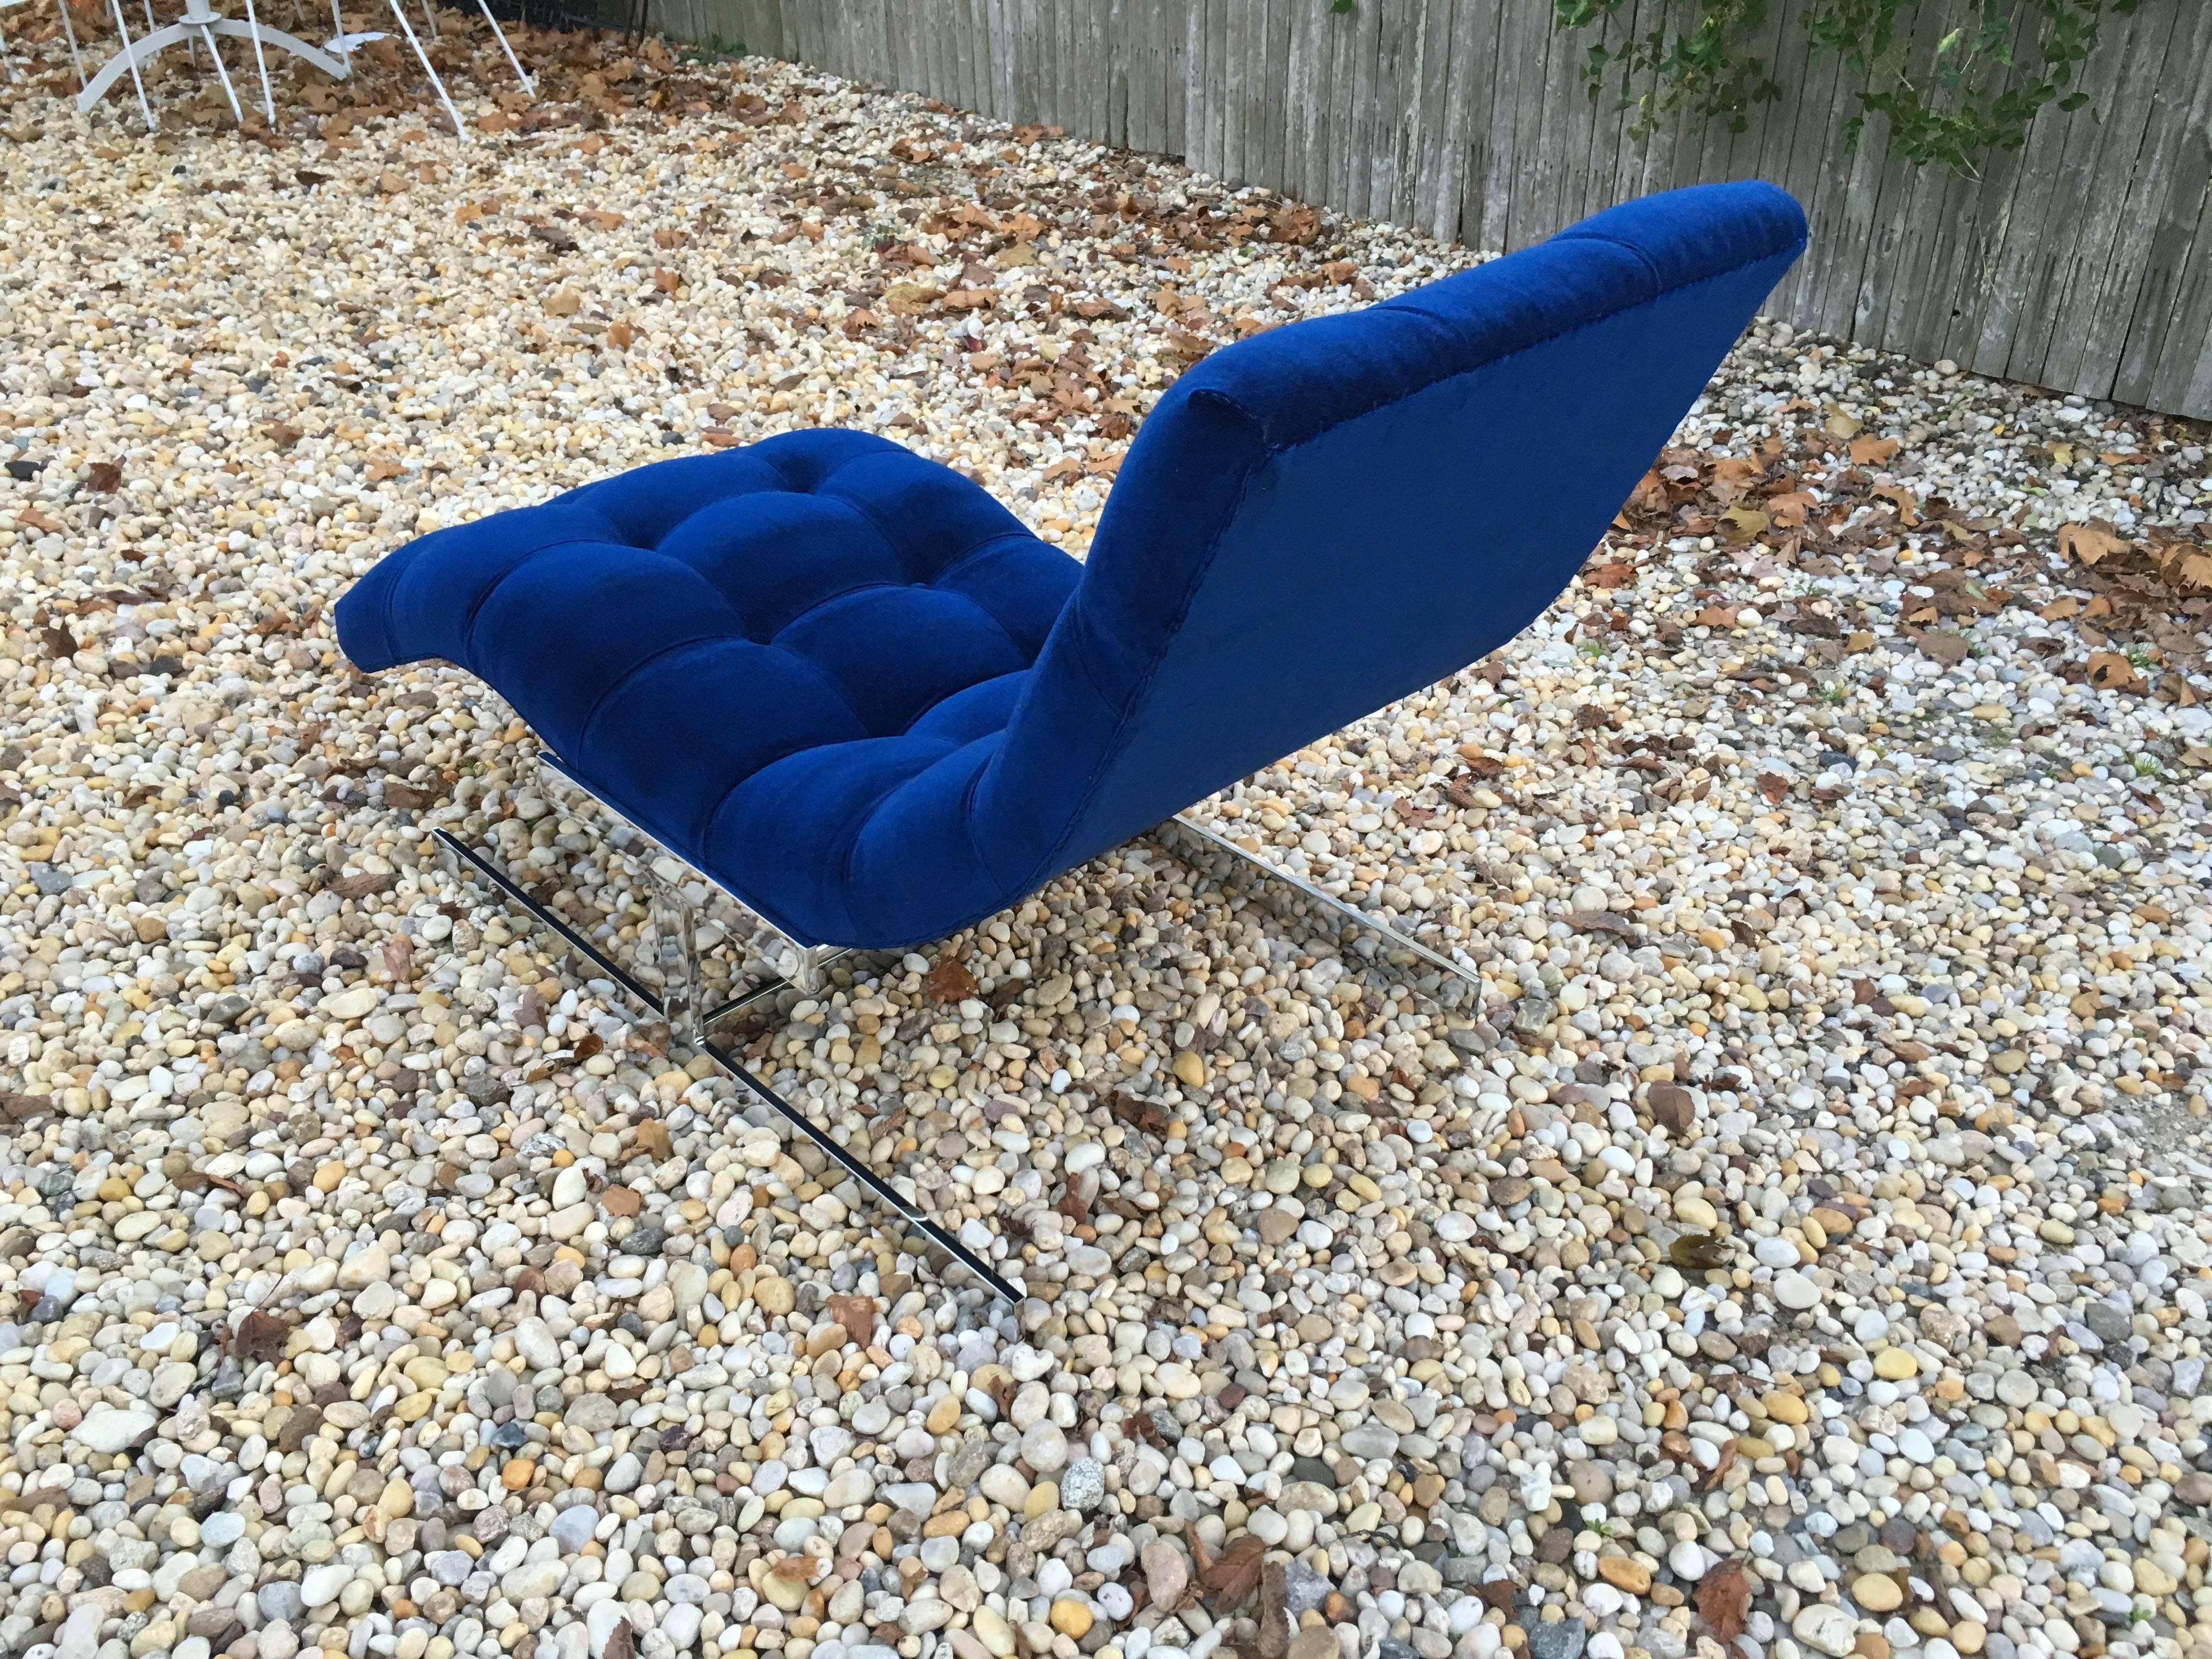 Milo Baughman chaise longue recovered in an 